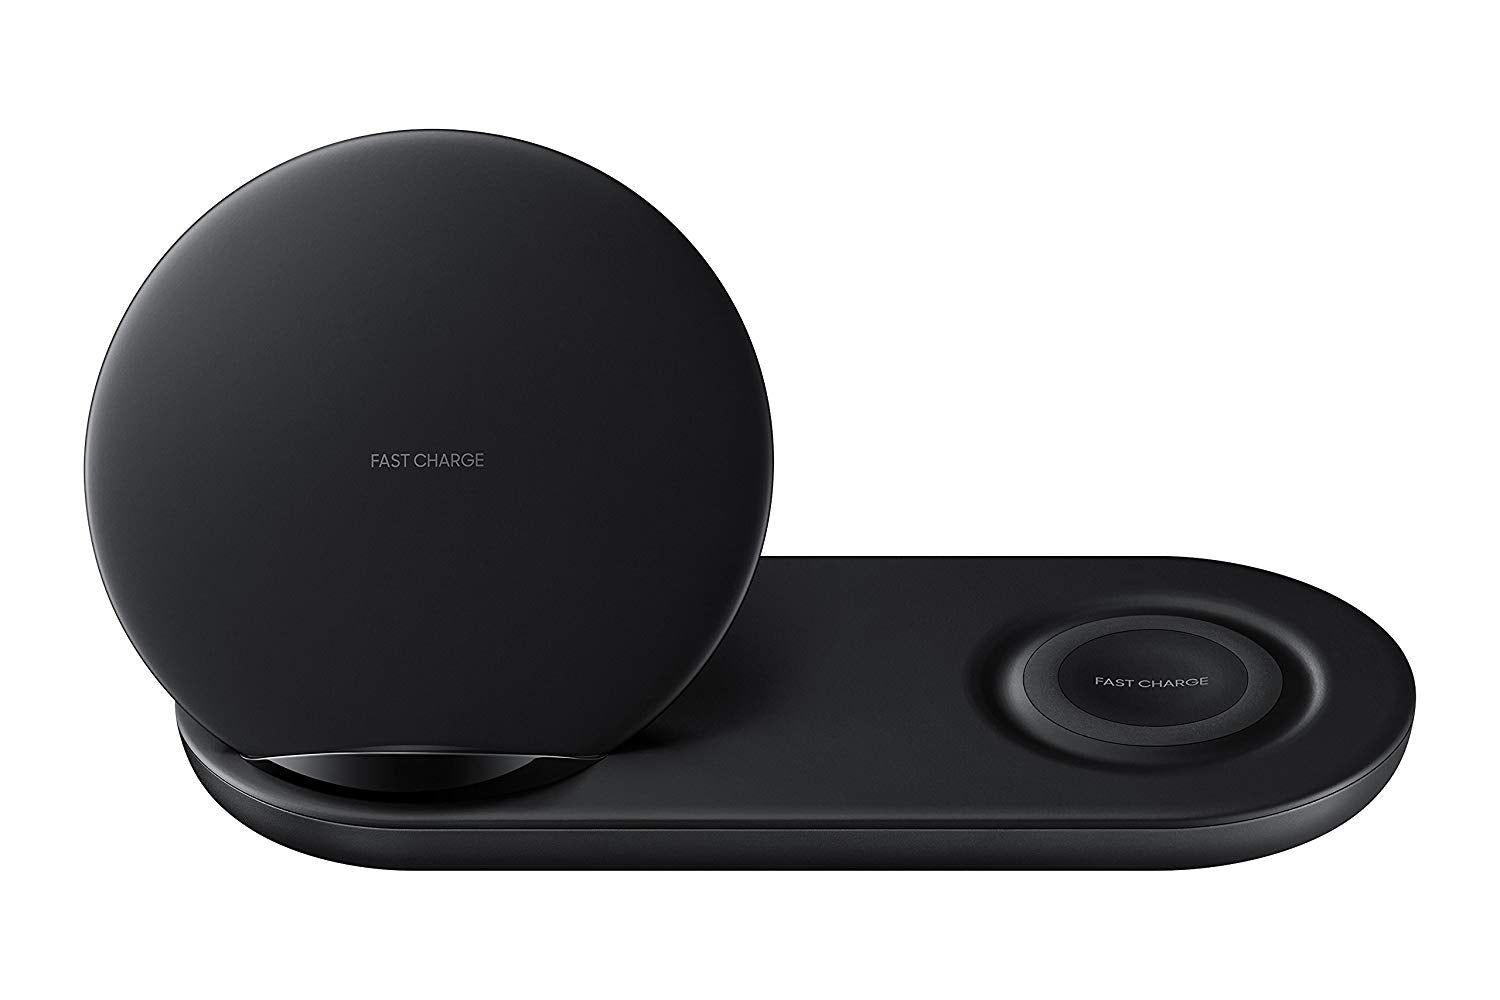 Samsung Wireless Charger DUO Fast Charge Stand &amp; Pad - Black (Pre-Owned)